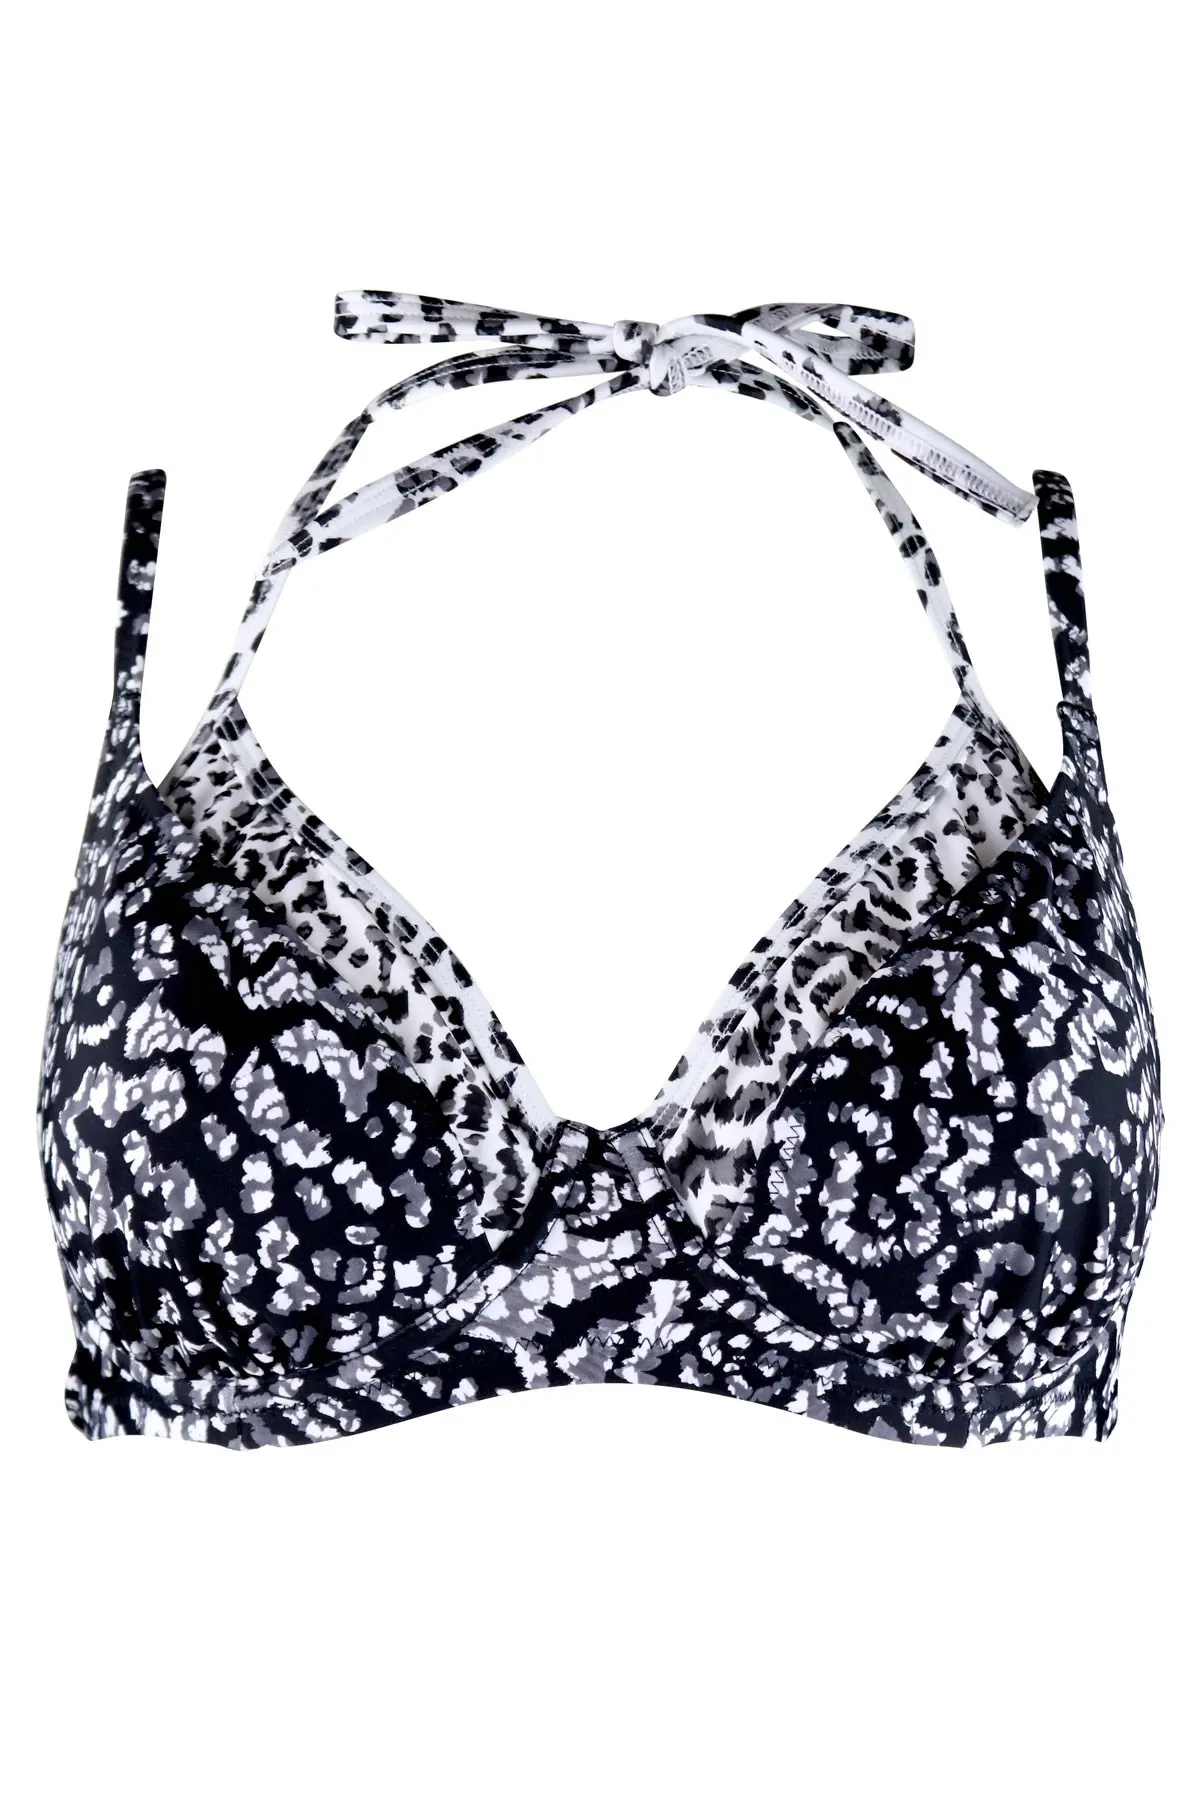 Mixology Underwired Double Strap Top | Pour Moi | Mixology Underwired ...